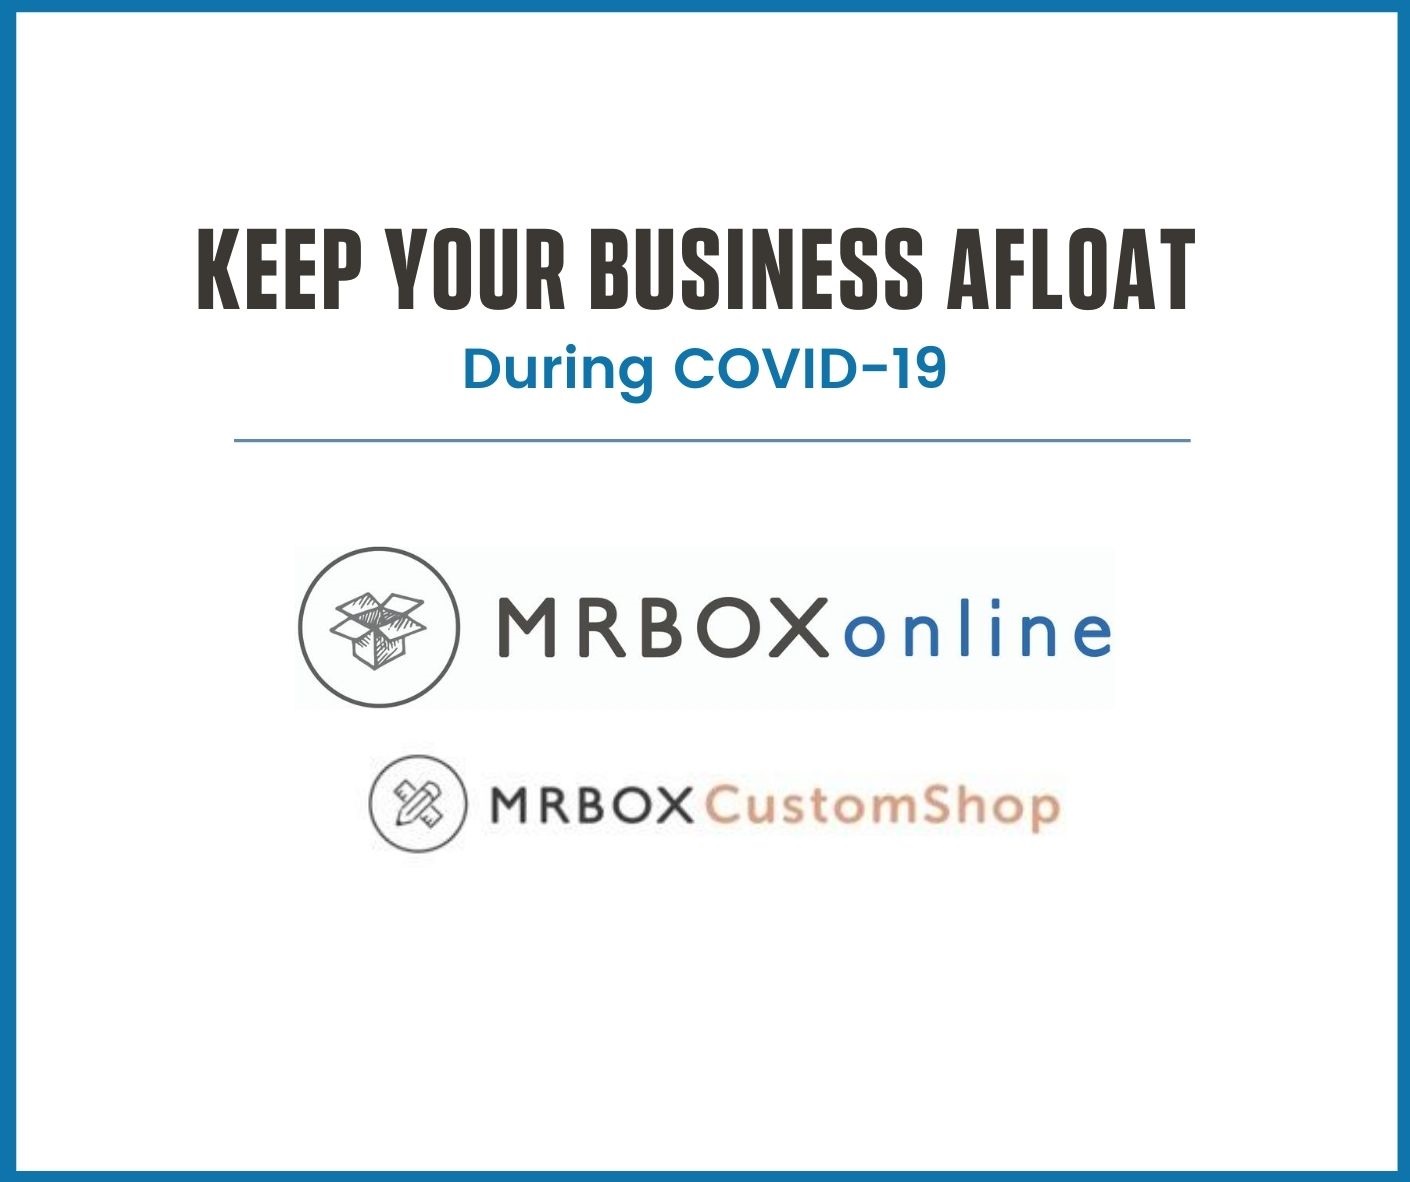 Keep Your Business Afloat During COVID-19